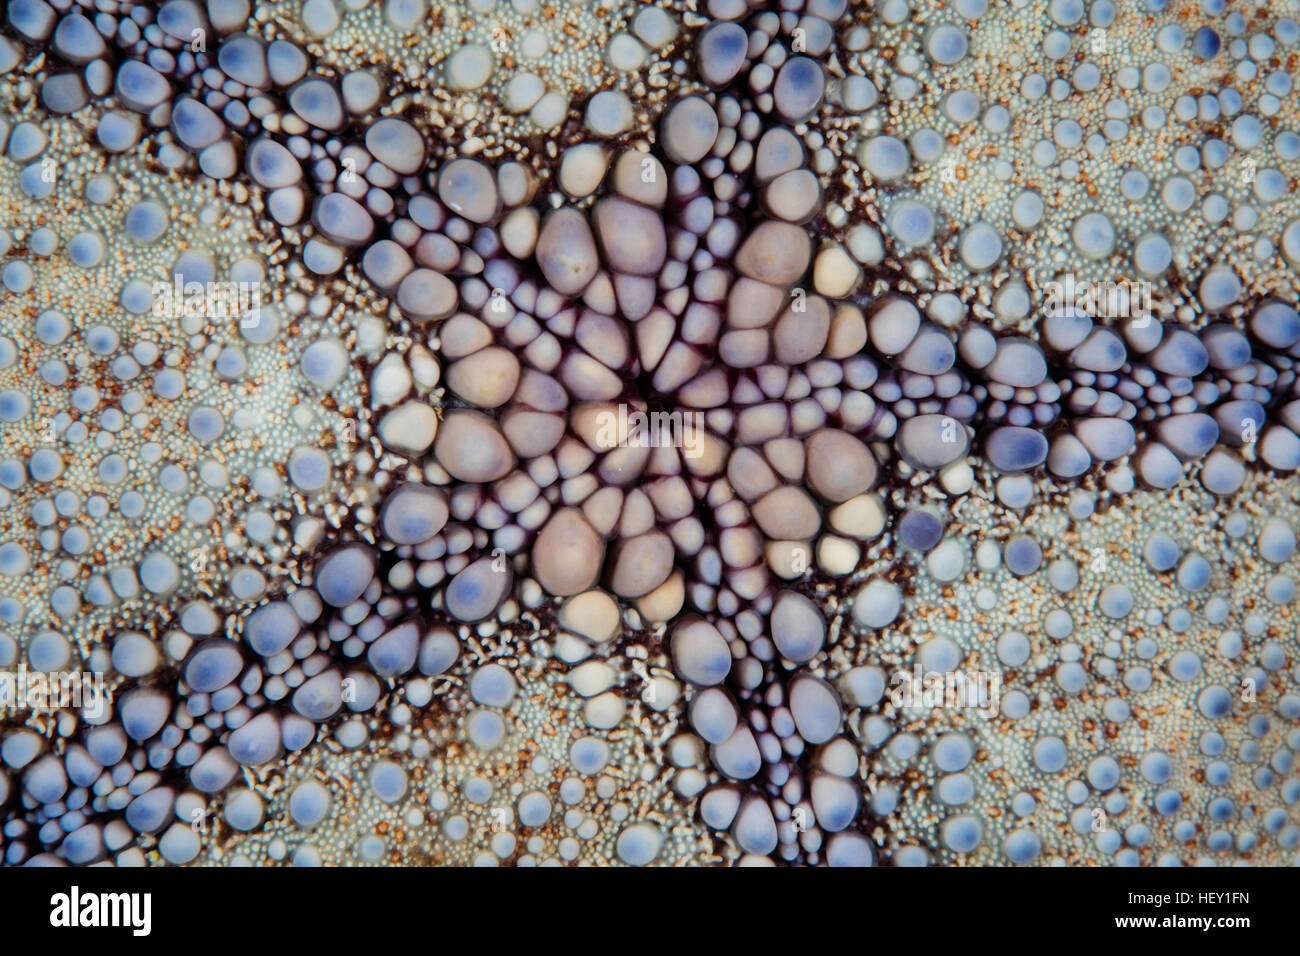 Detail of a Pin cushion starfish (Culcita sp.) on a reef in the Solomon Islands. This star is found throughout the Indo-Pacific. Stock Photo